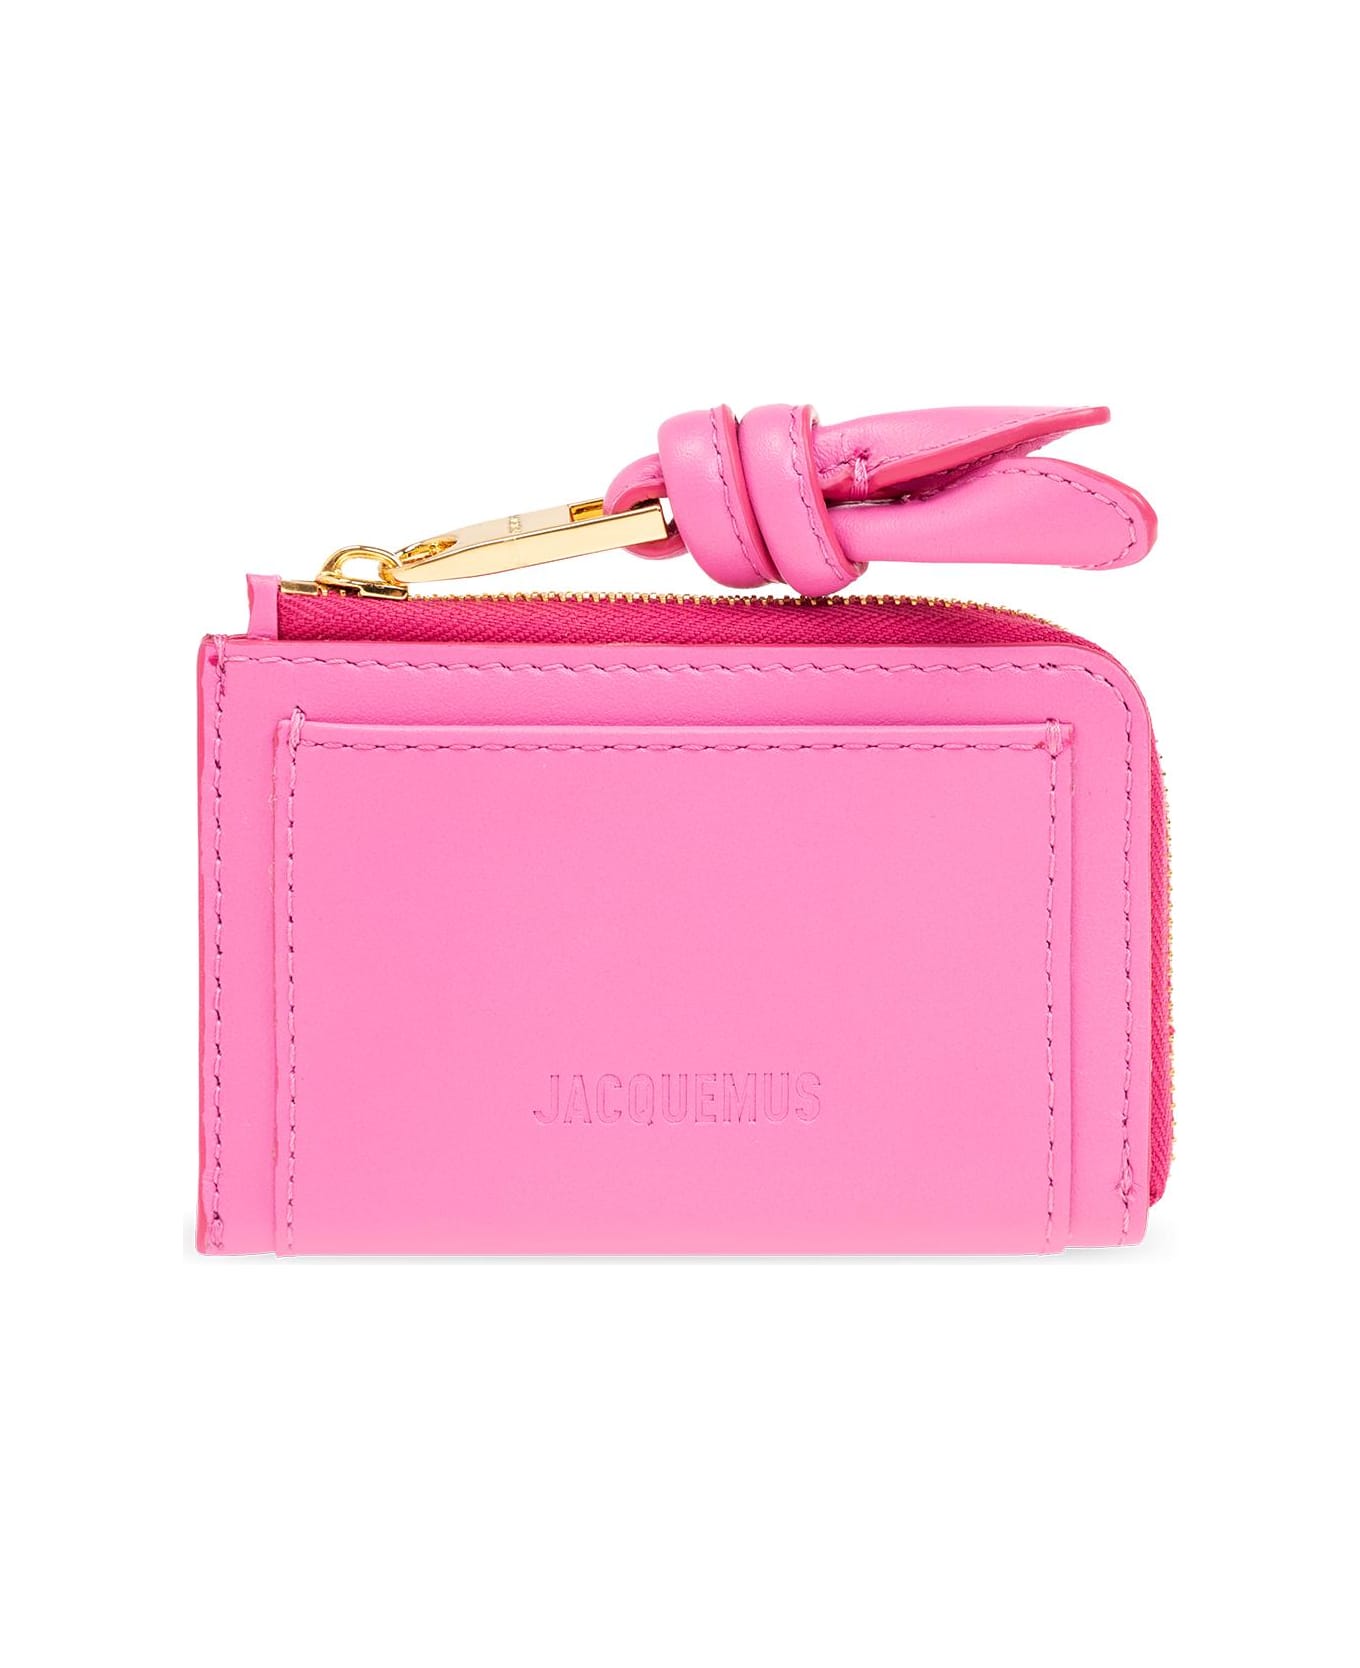 Jacquemus Leather Card Case - Pink 財布